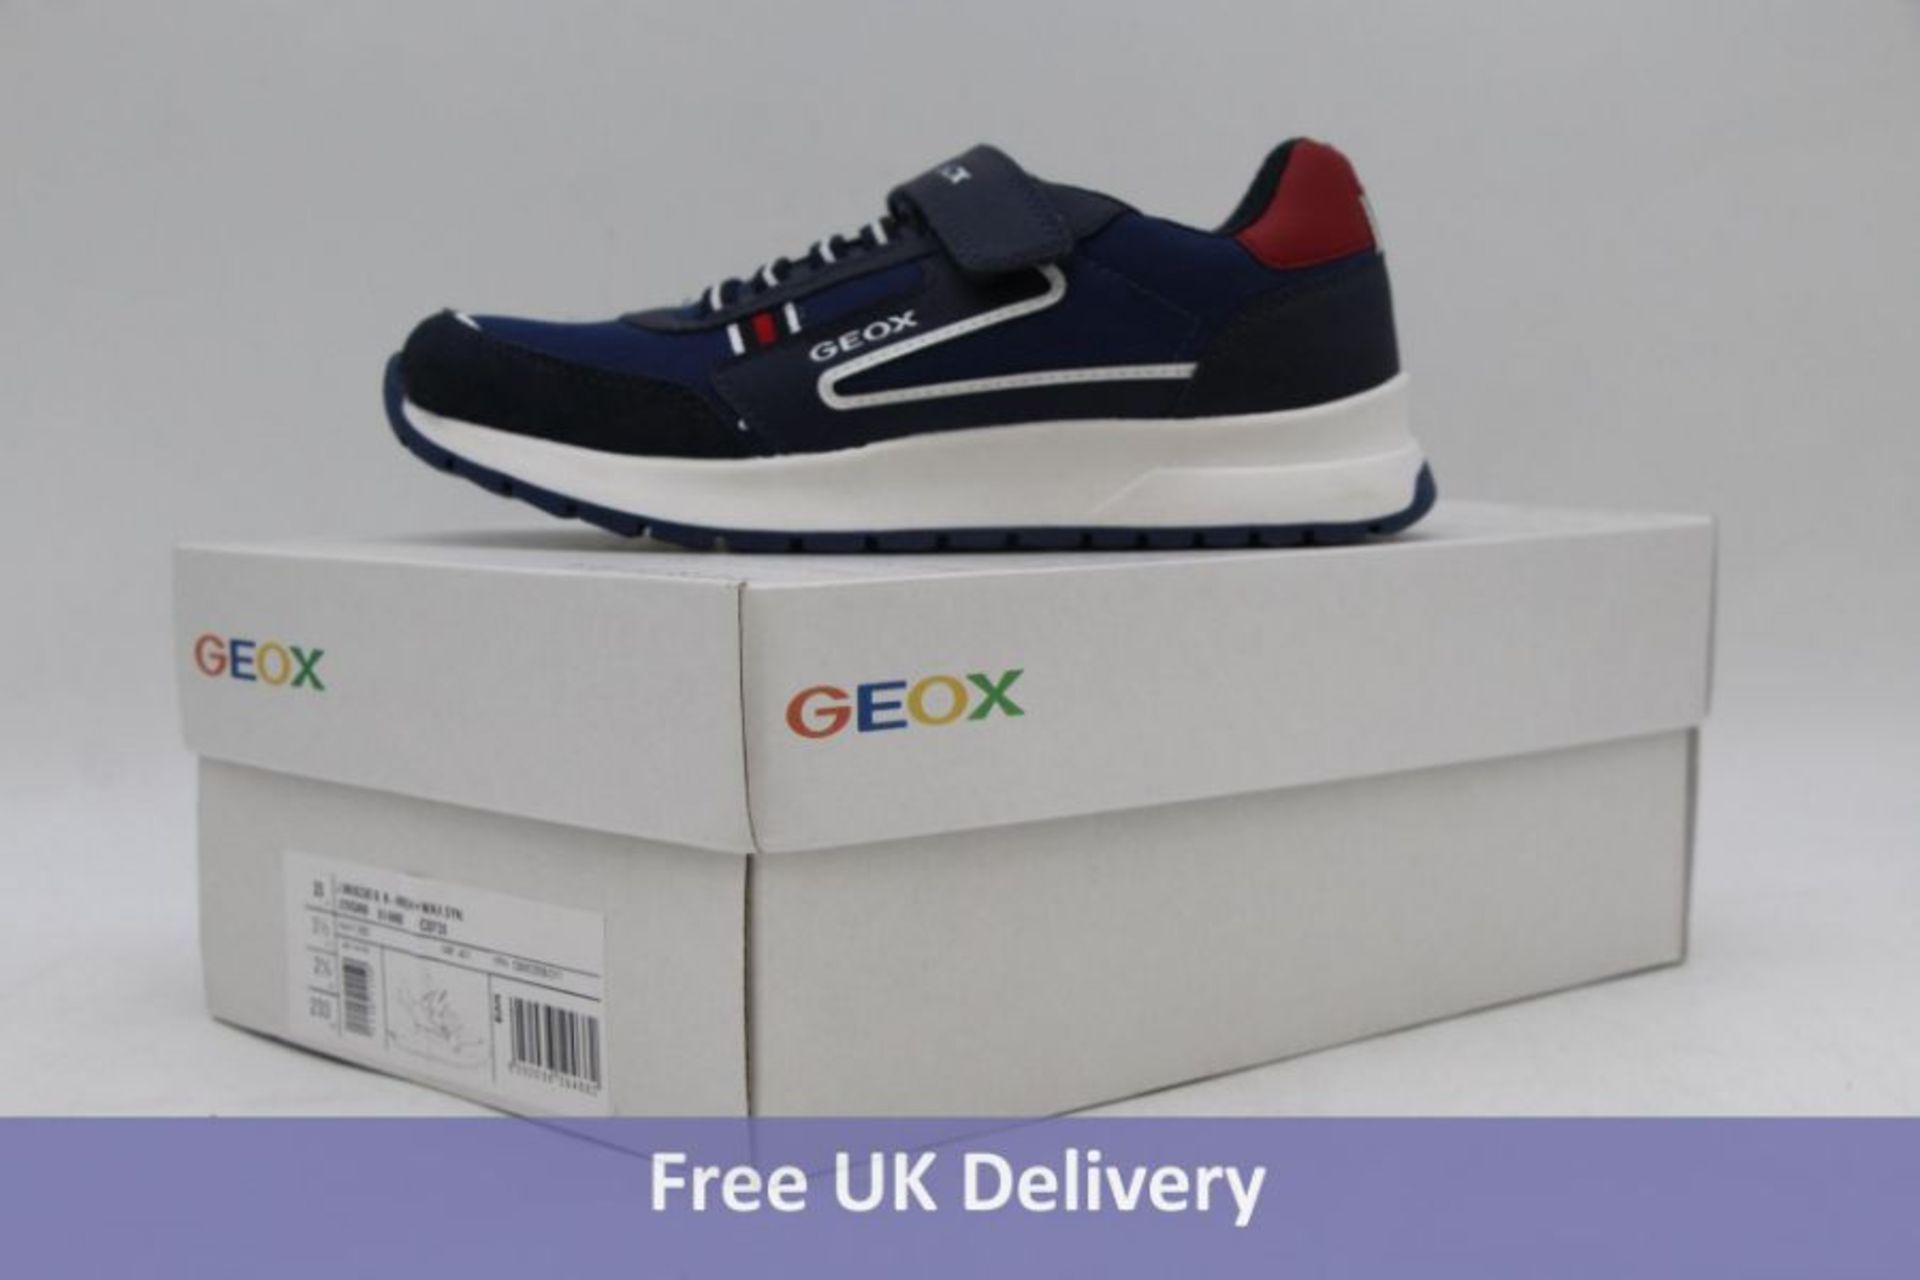 Two pairs of Geox Children's Trainers to include 1x J Briezee B Kid's Trainers, Navy/Red, UK 2.5 and